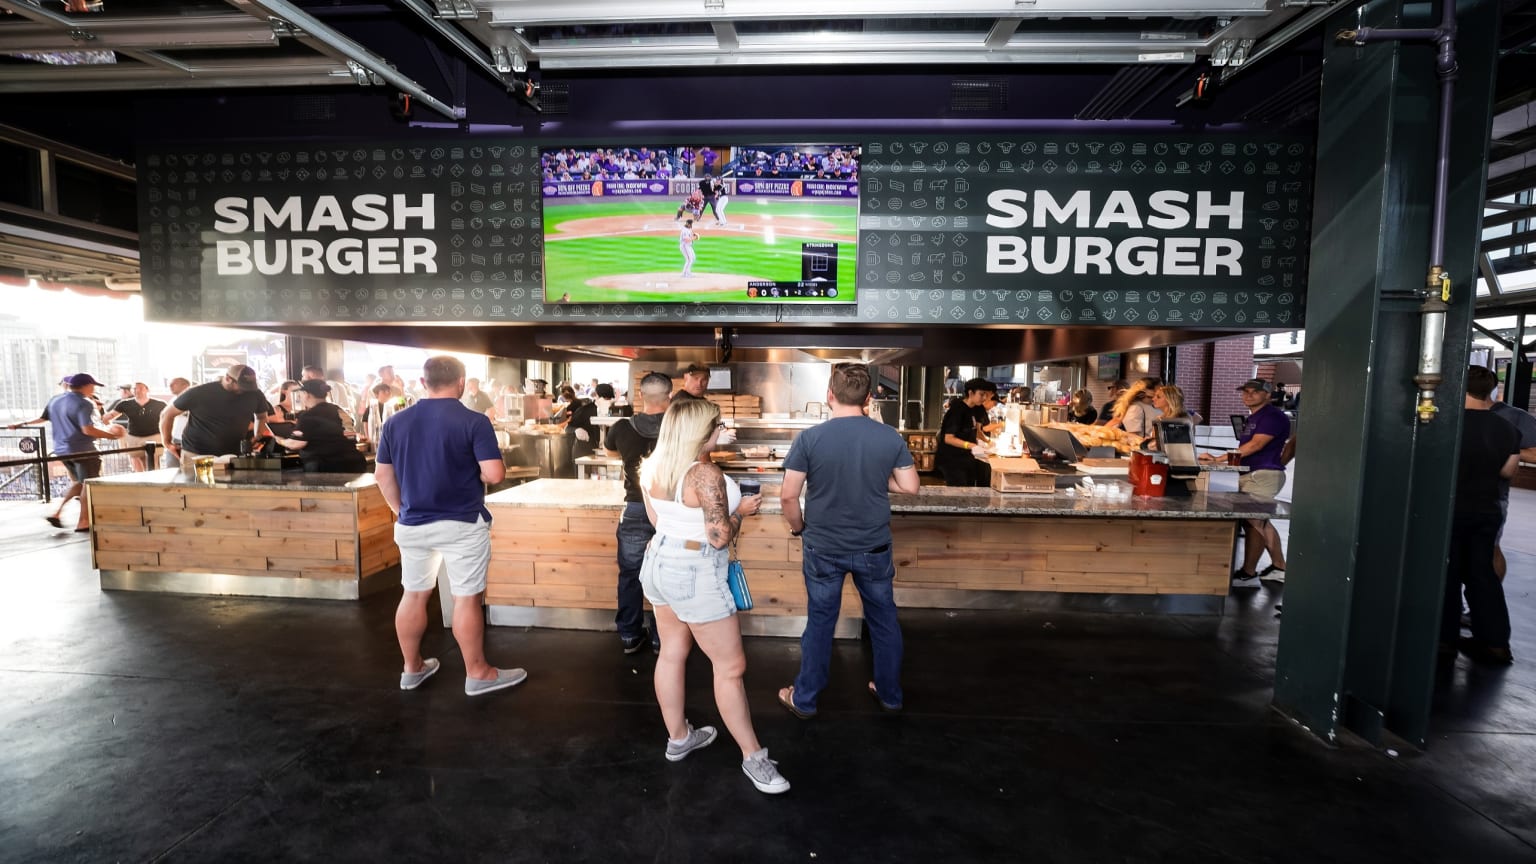 Rockies fans 1st to try new food lineup at Coors Field in 2023